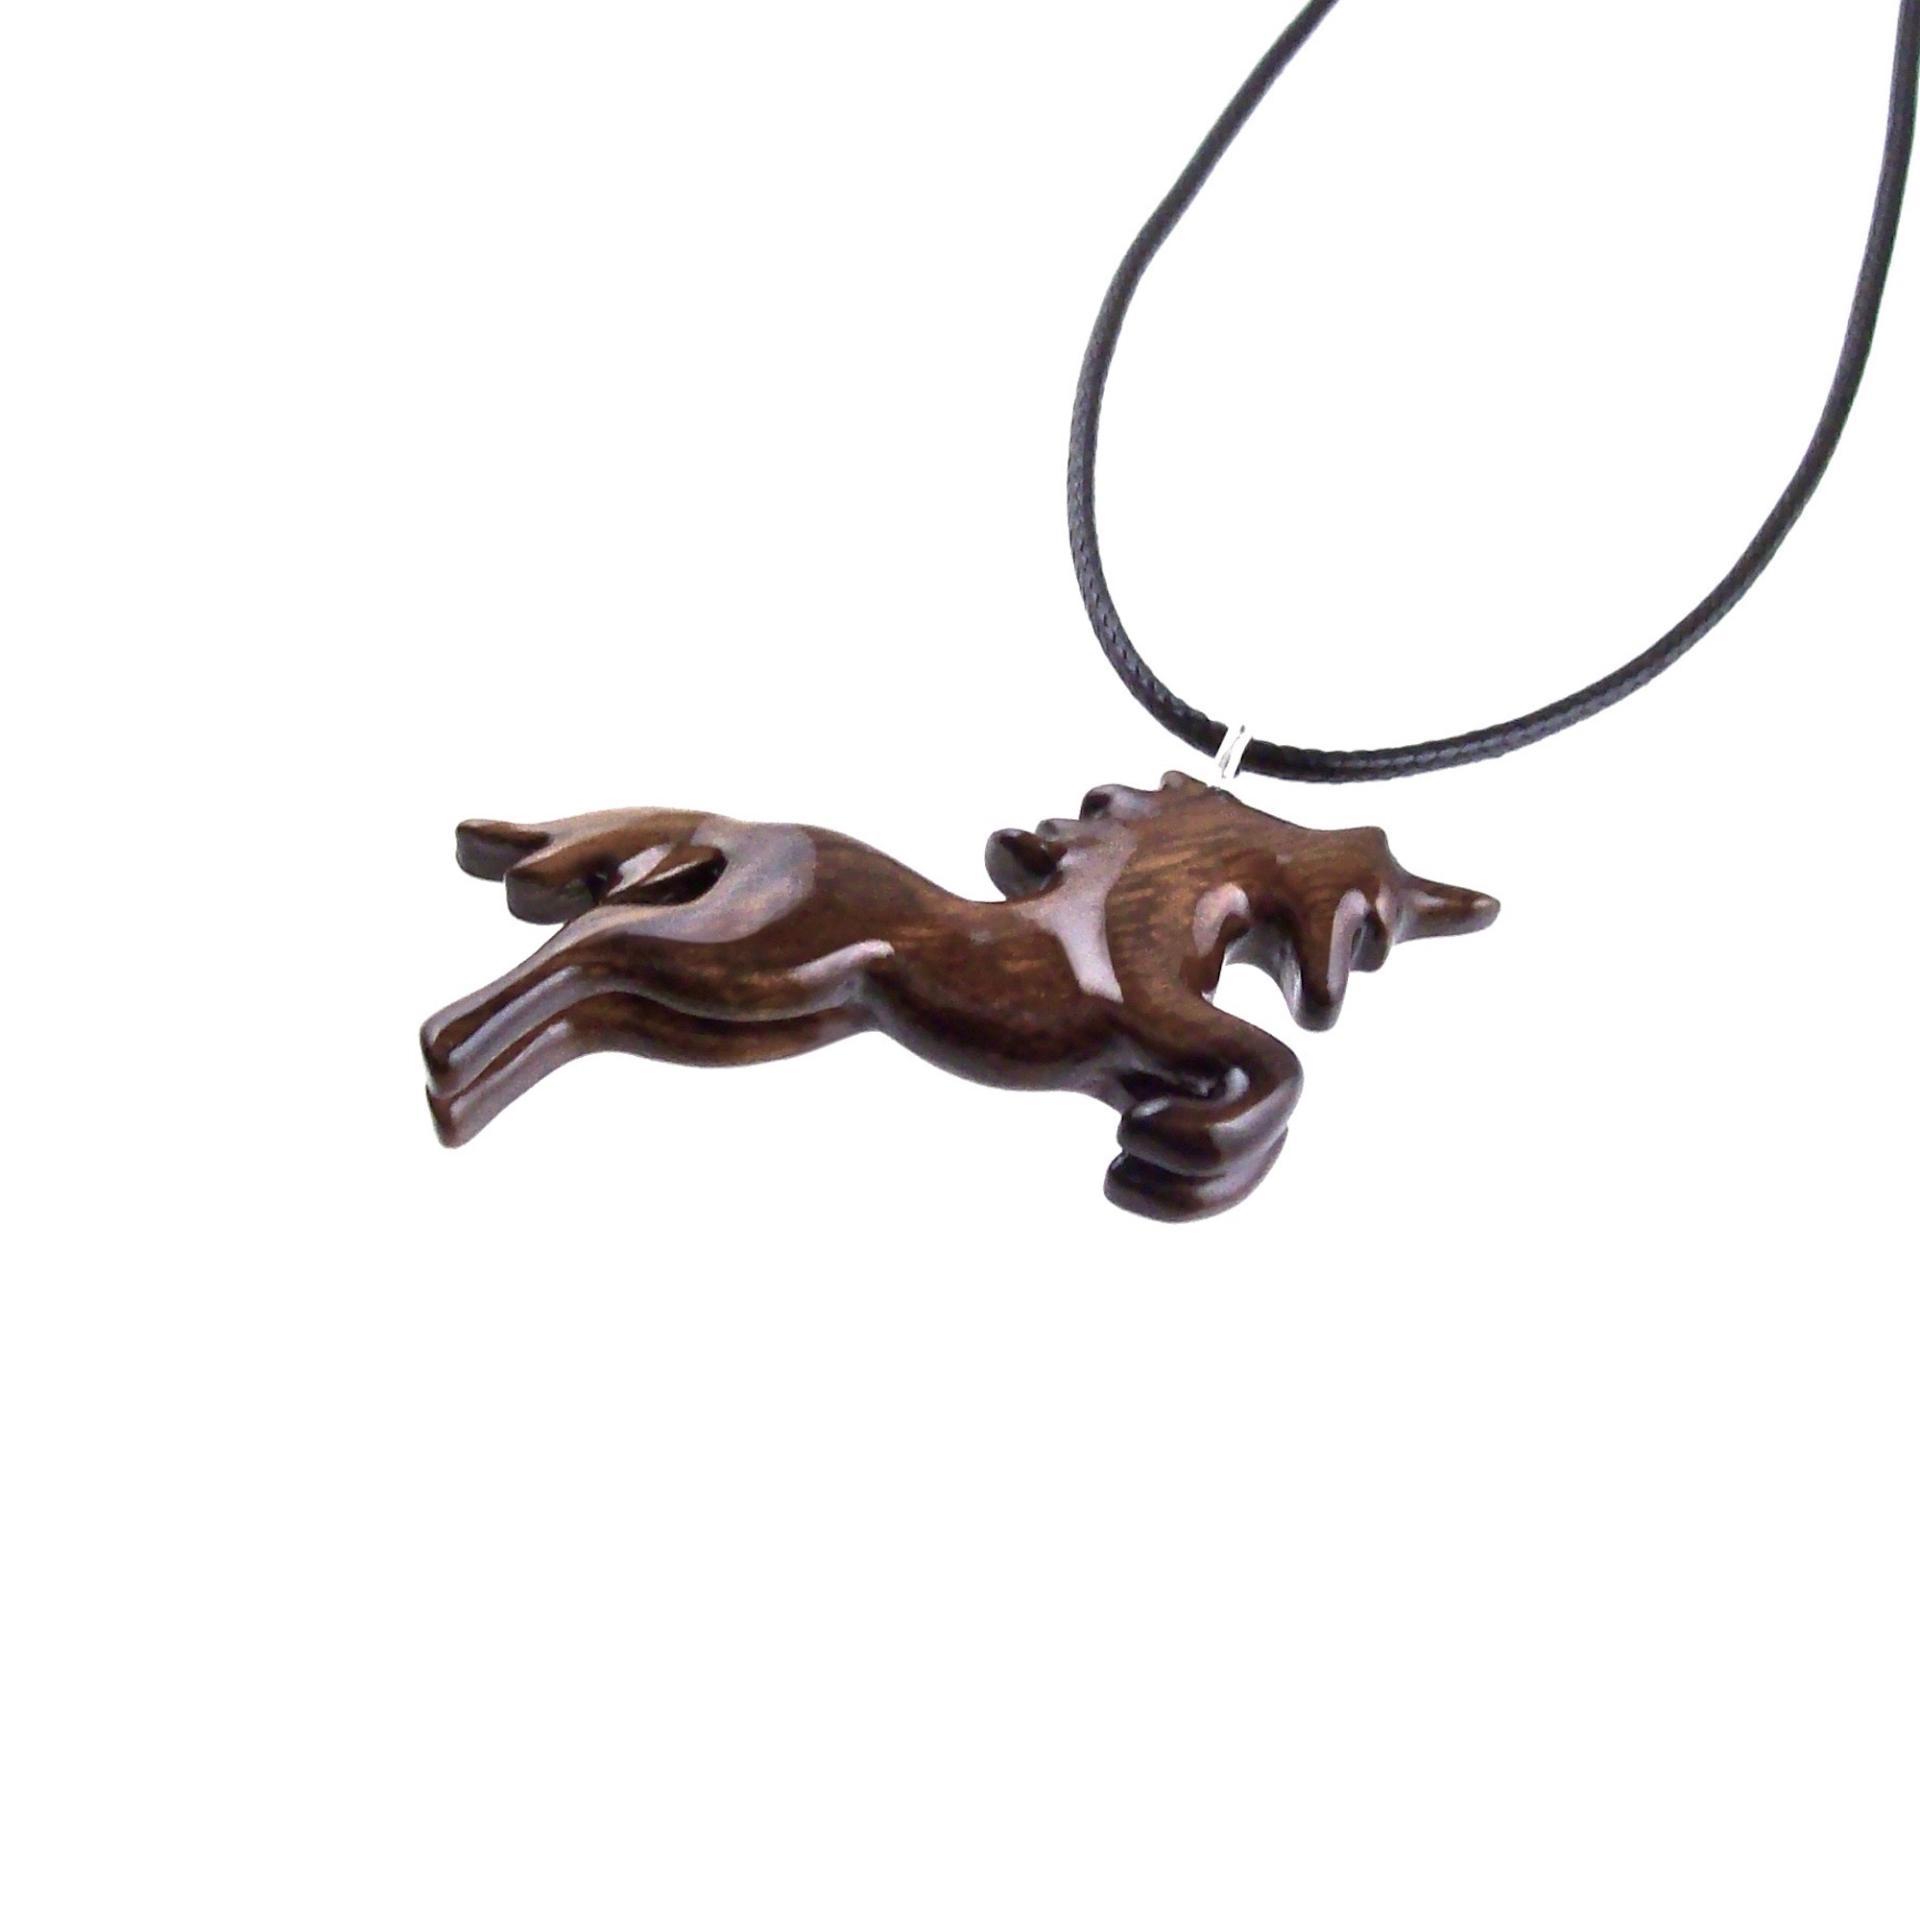 Unicorn Pendant, Hand Carved Wooden Unicorn Necklace, Fantasy Animal Necklace, Wood Jewelry, One of a Kind Gift